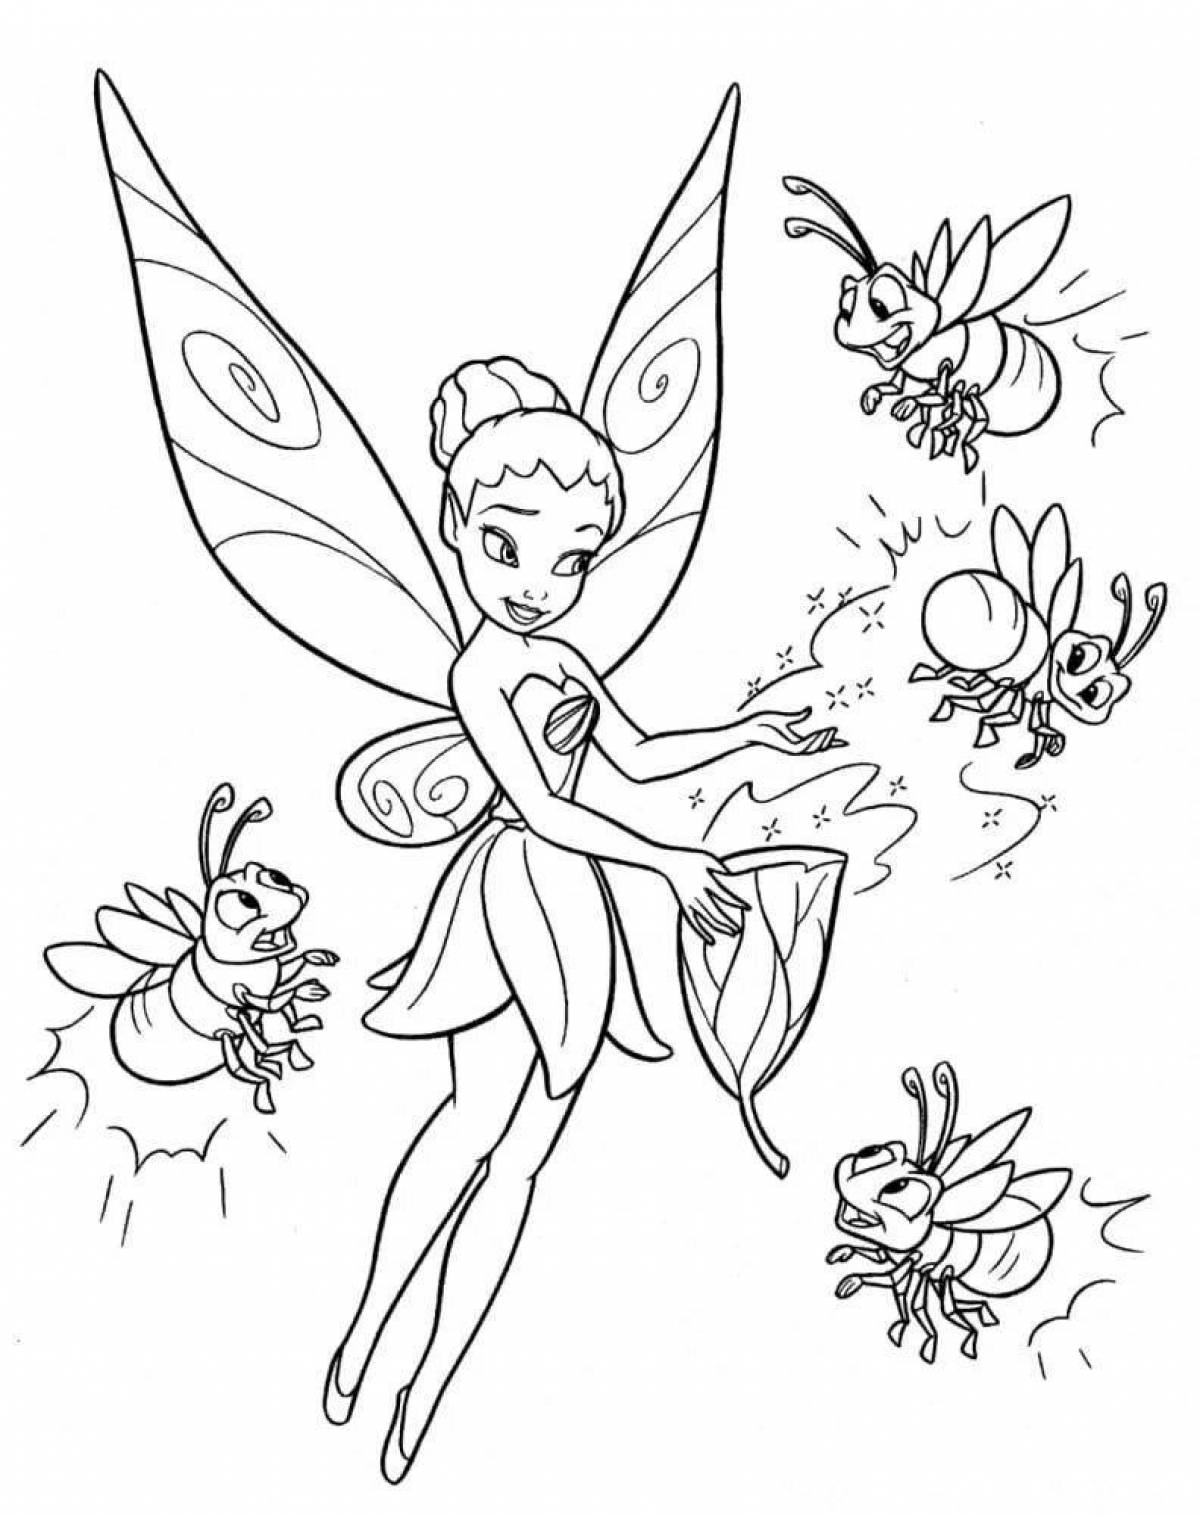 Disney fairies glowing coloring pages